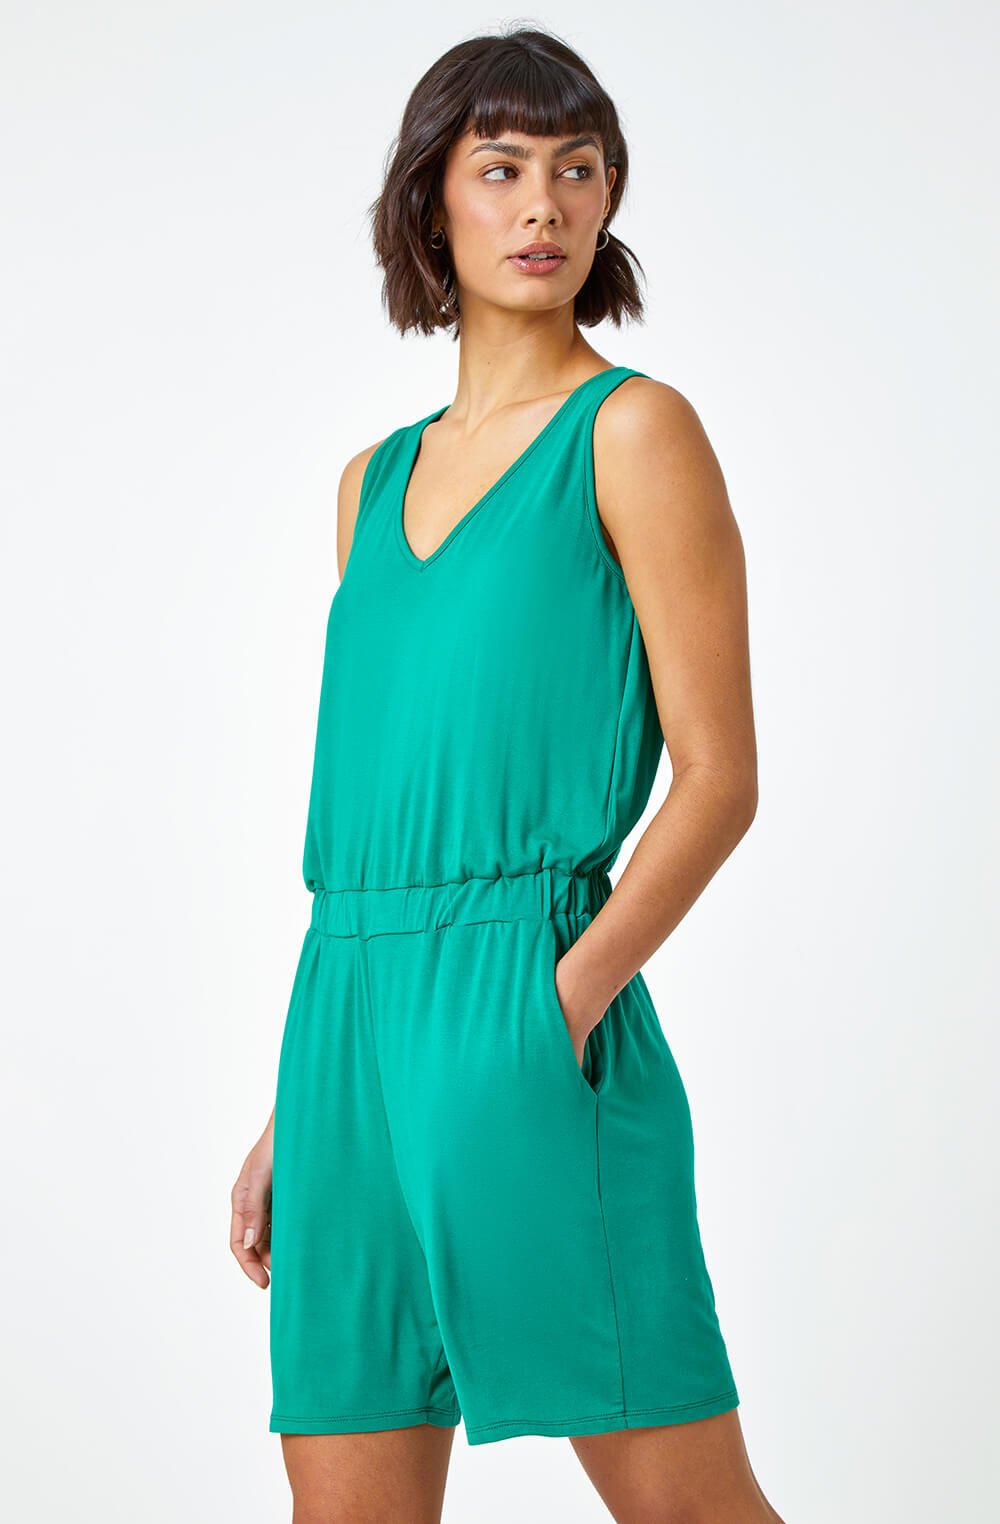 Green Plain Sleeveless Stretch Playsuit, Image 2 of 5